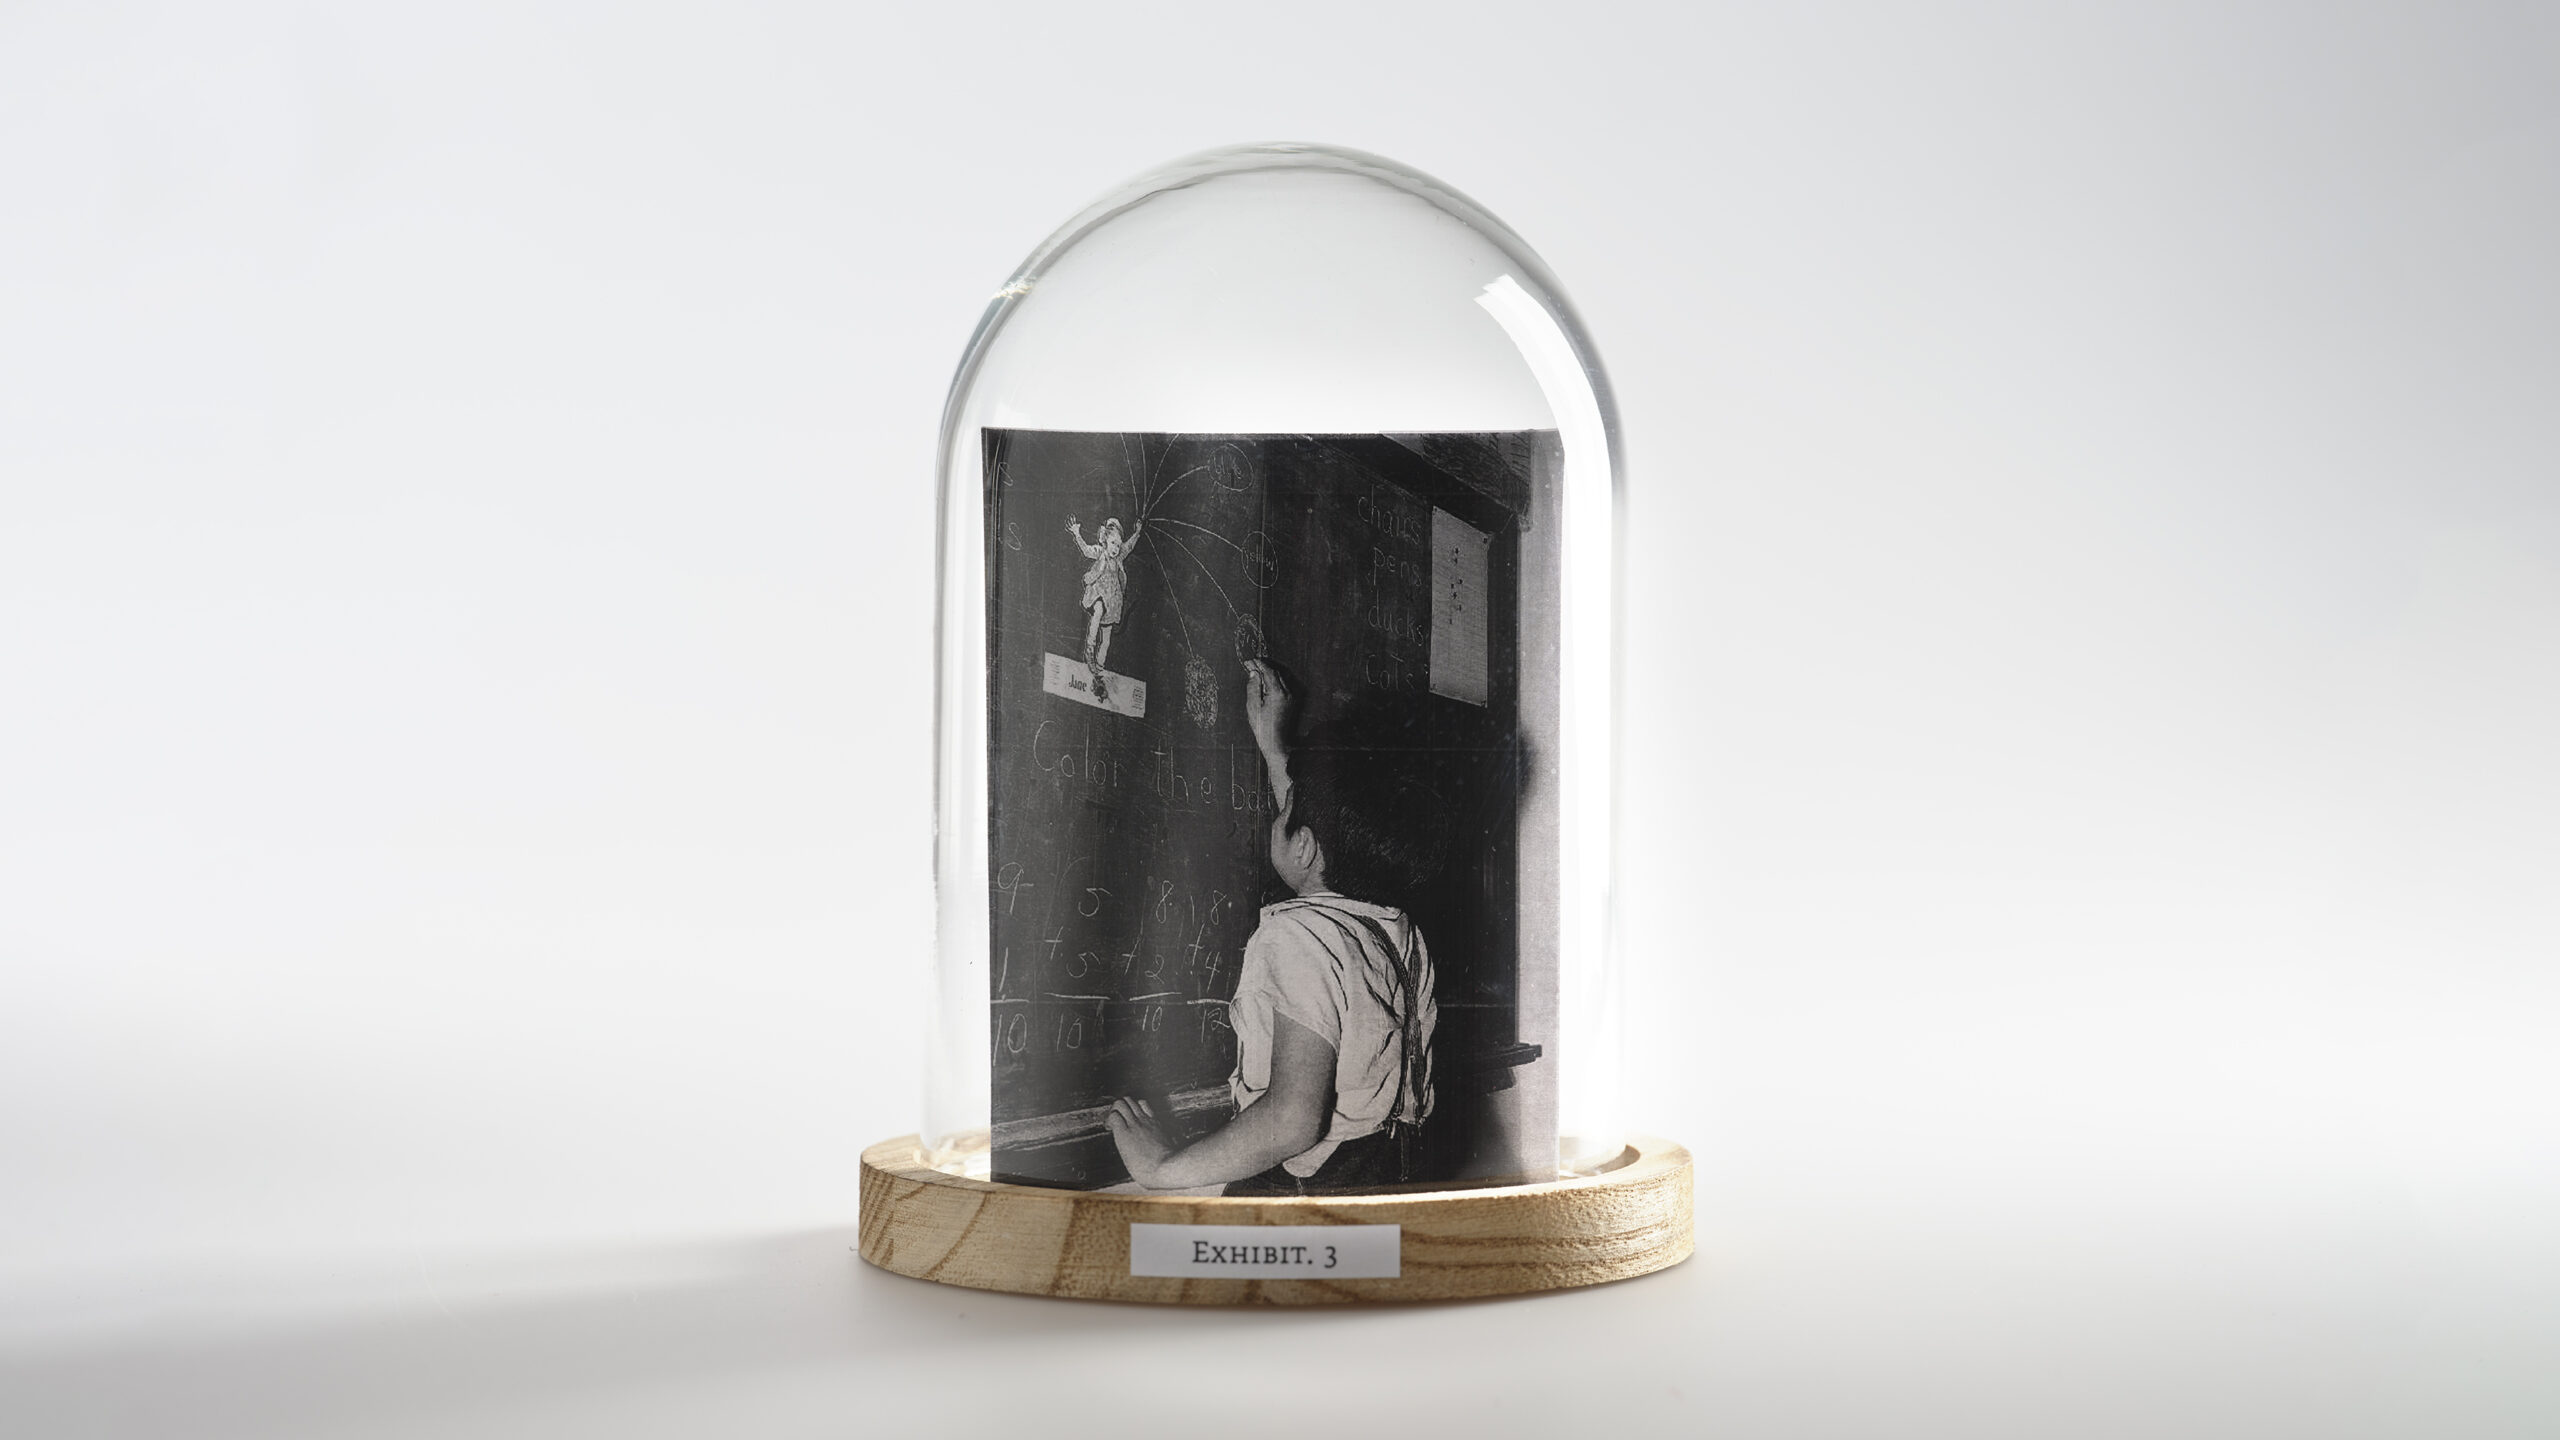 A bell jar with an image of a child writing on a chalkboard inside.